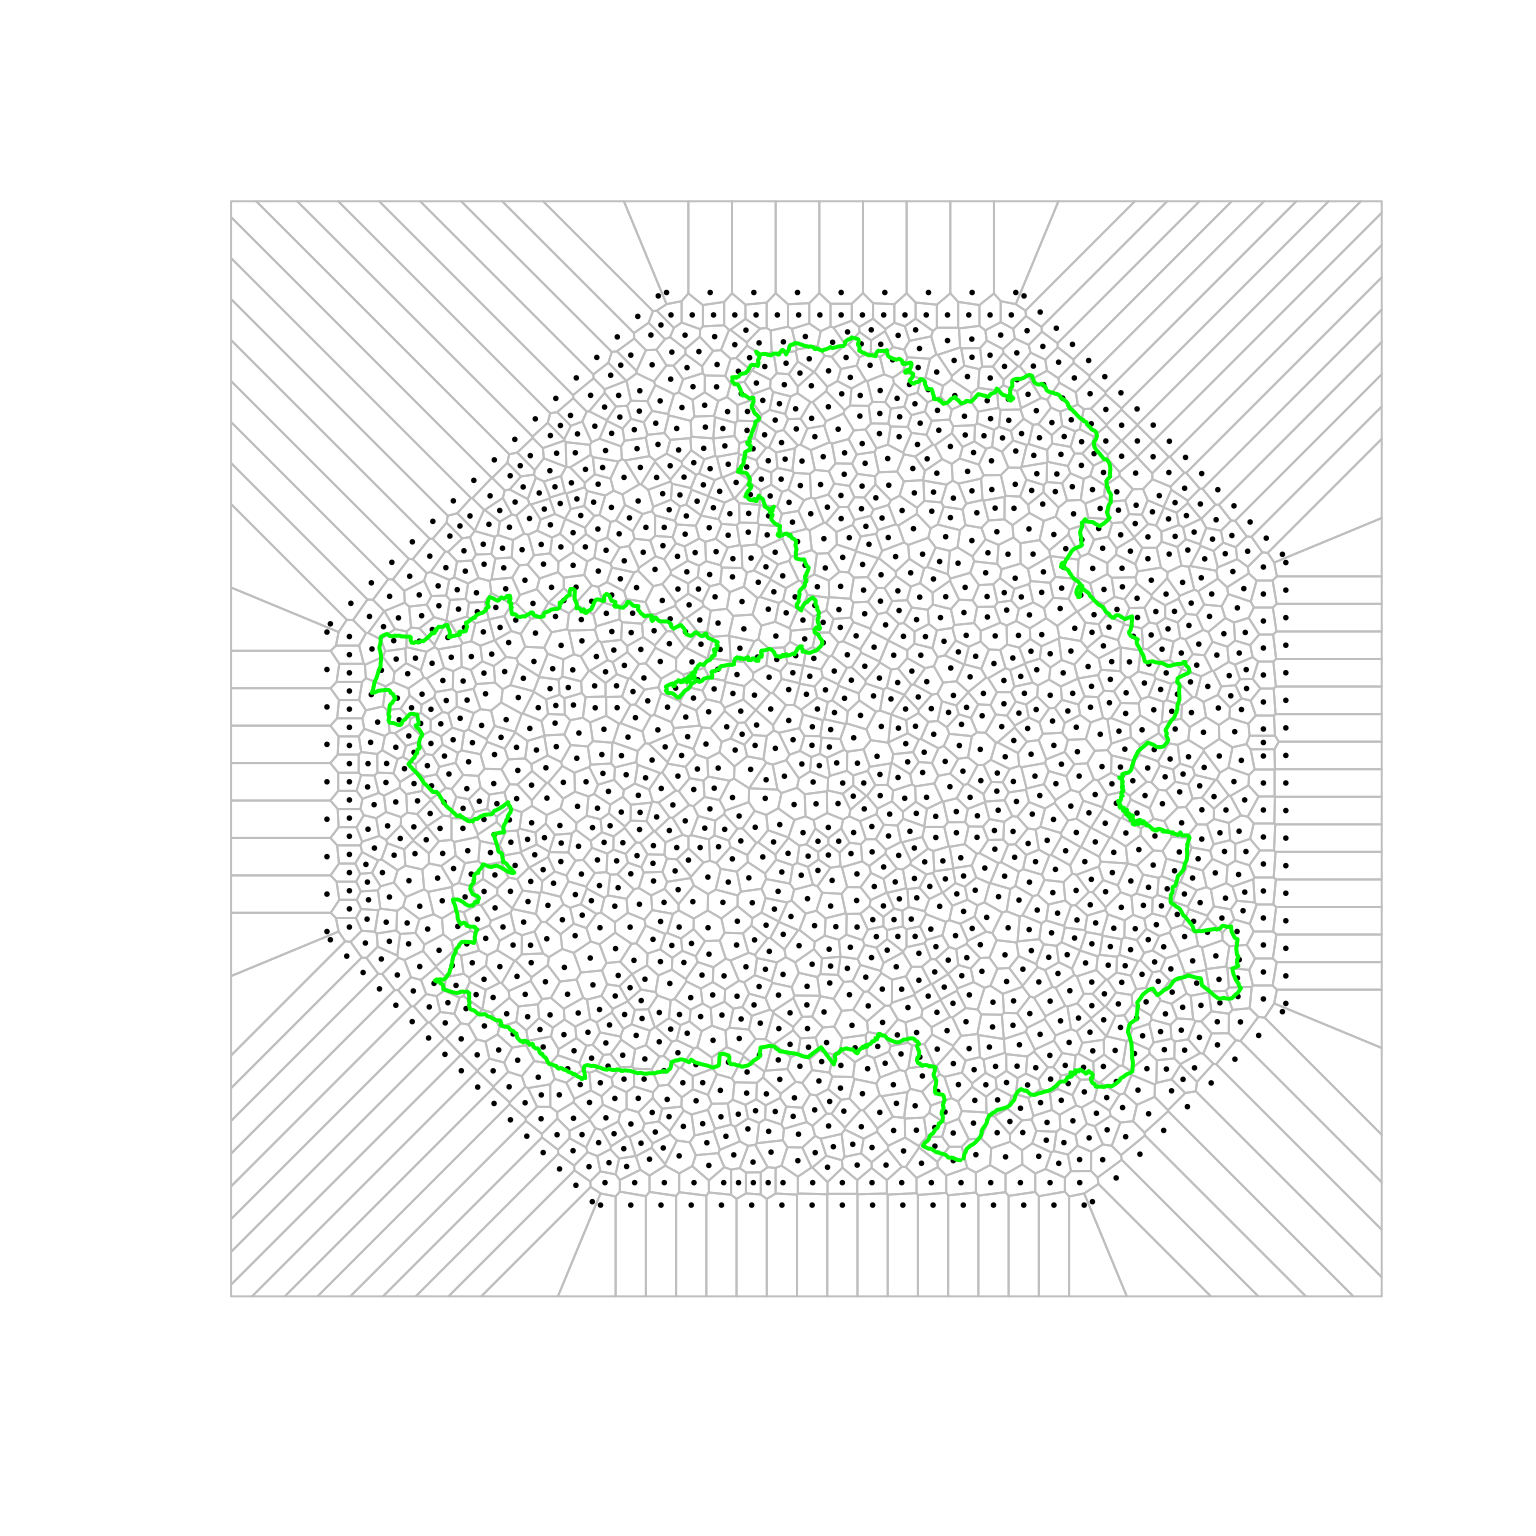 Voronoi tesselletation used in the analysis of forest fires in Castilla-La Mancha.